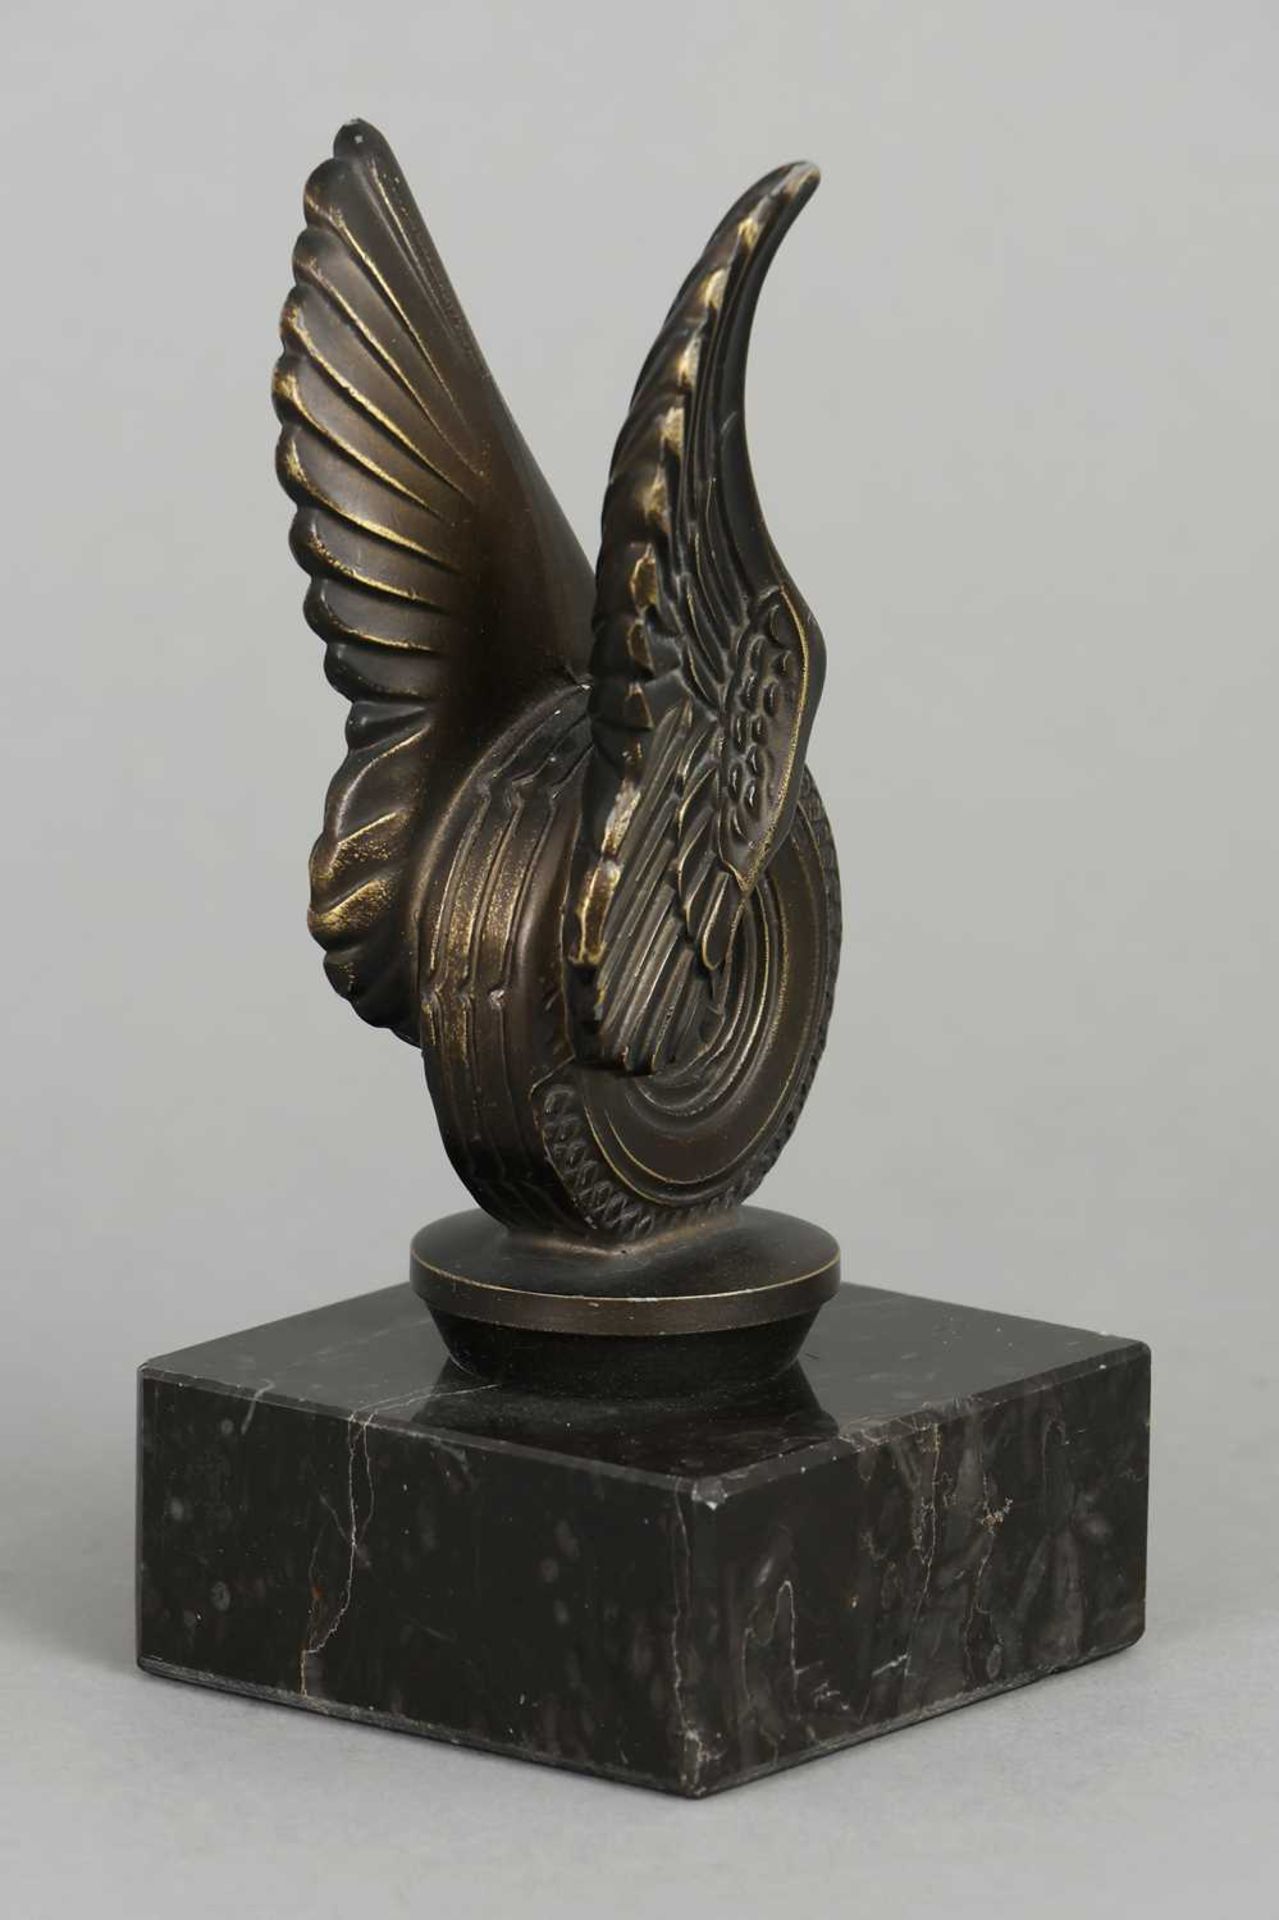 Automobilia Paperweight "Winged Wheel" - Image 2 of 3